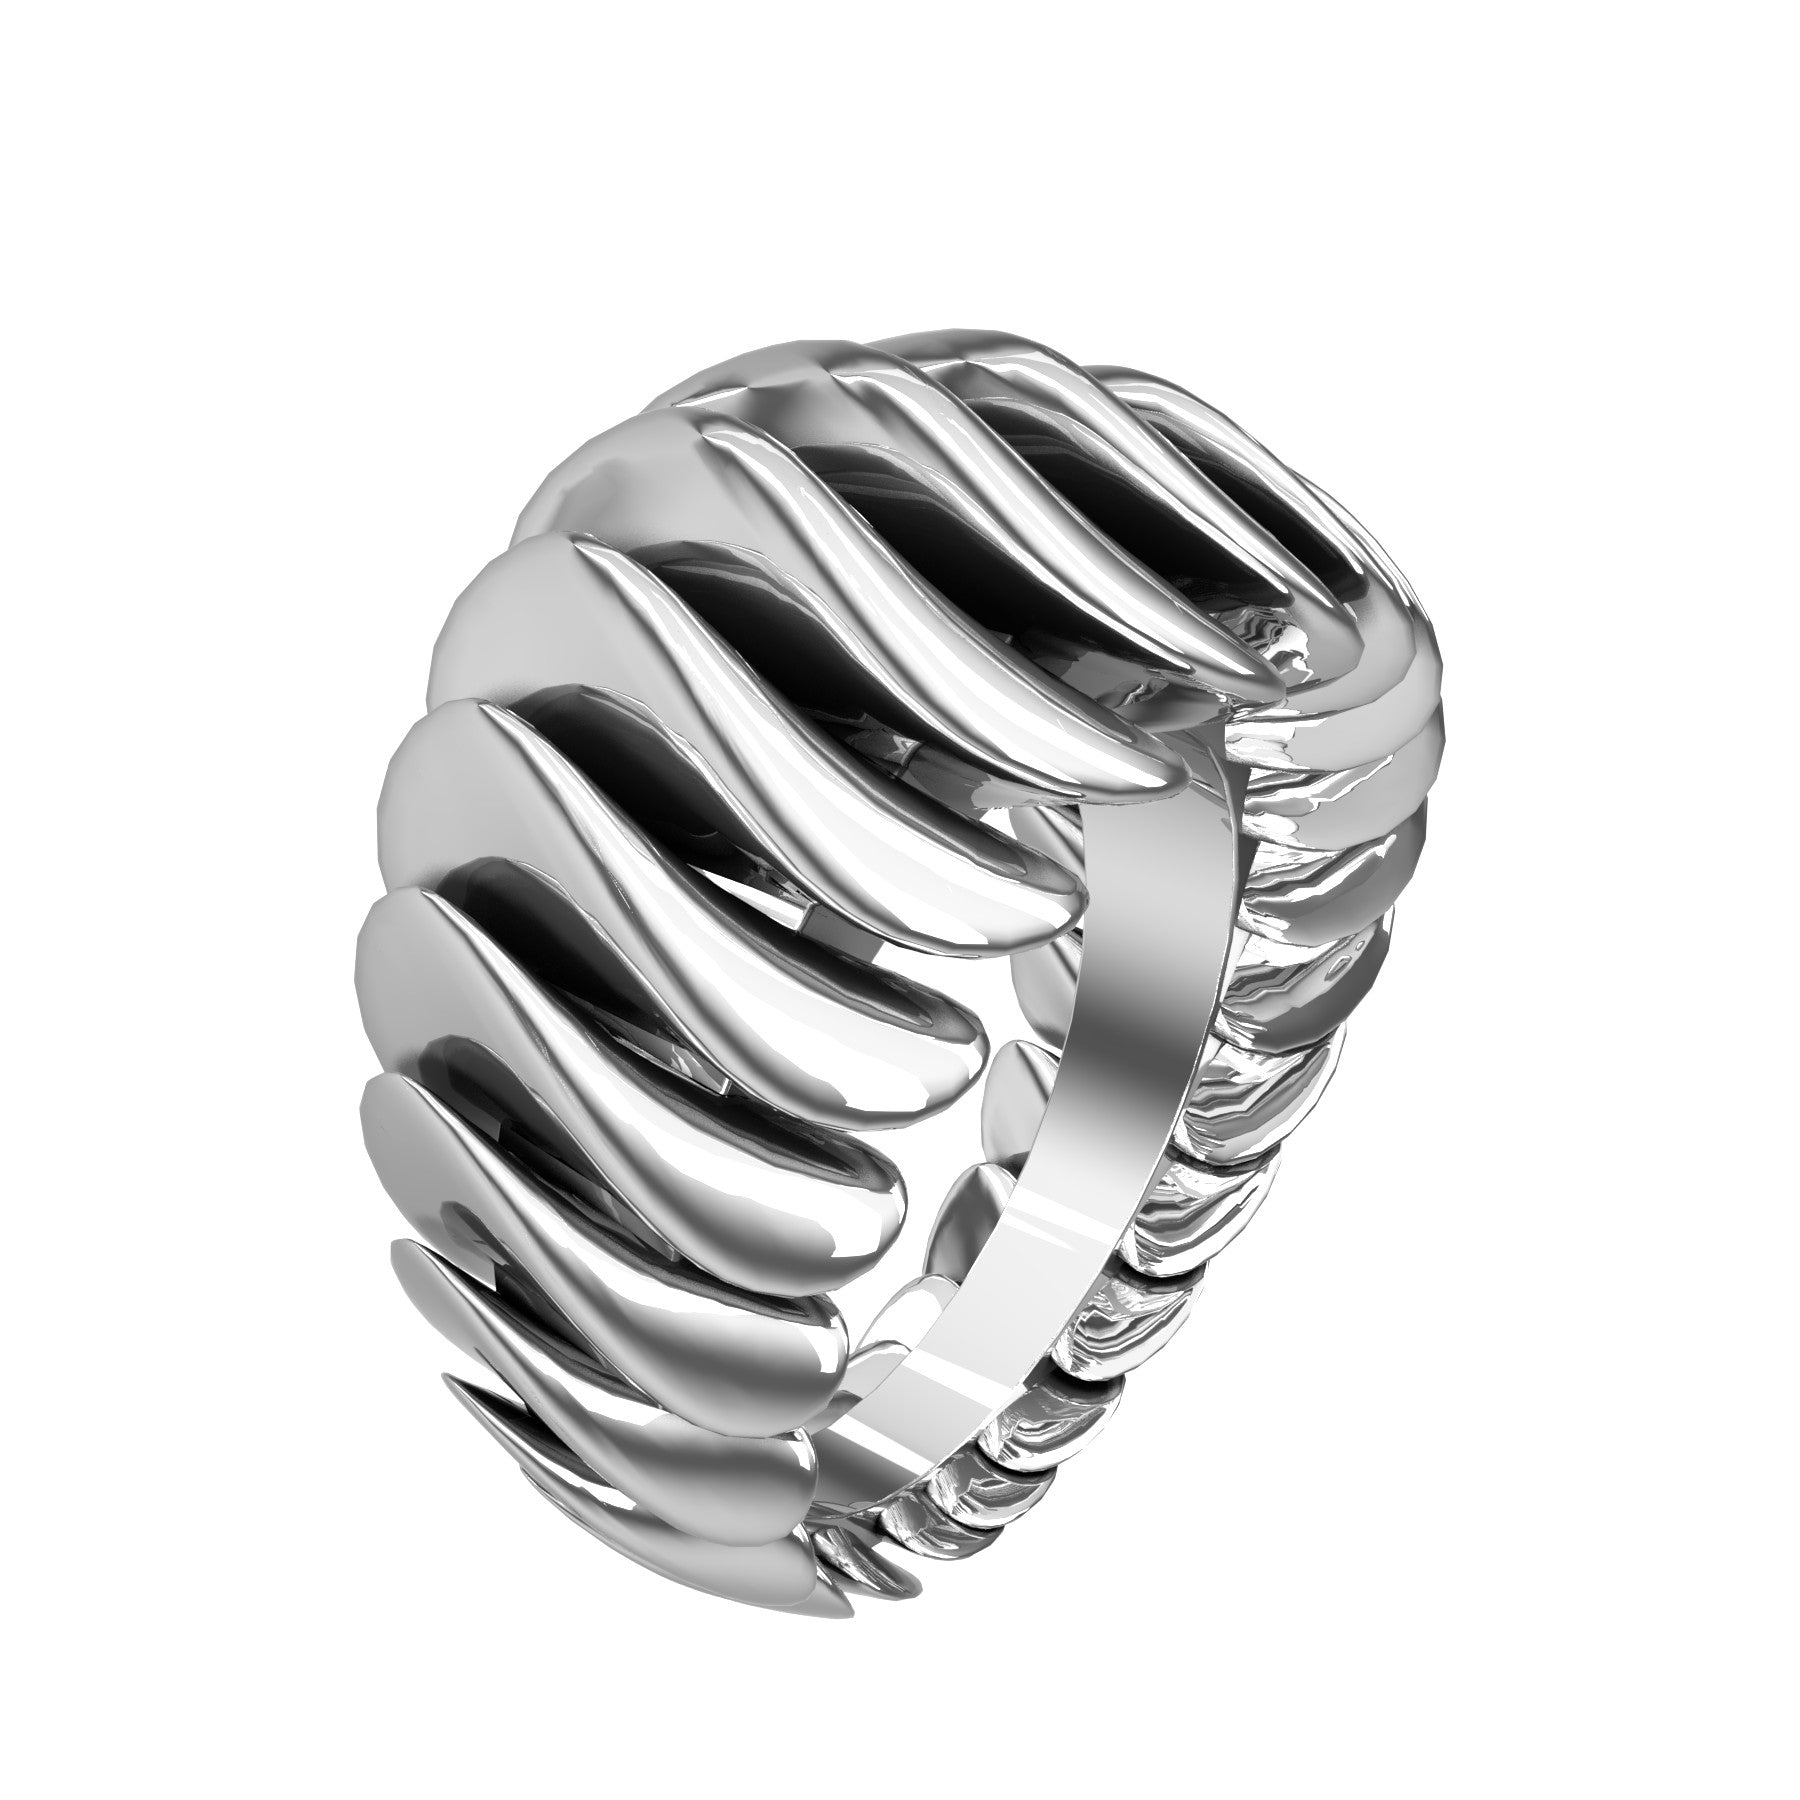 curvy ring, sterling silver, weight about 13,5 g. (0.47 oz), width 14,6 mm max